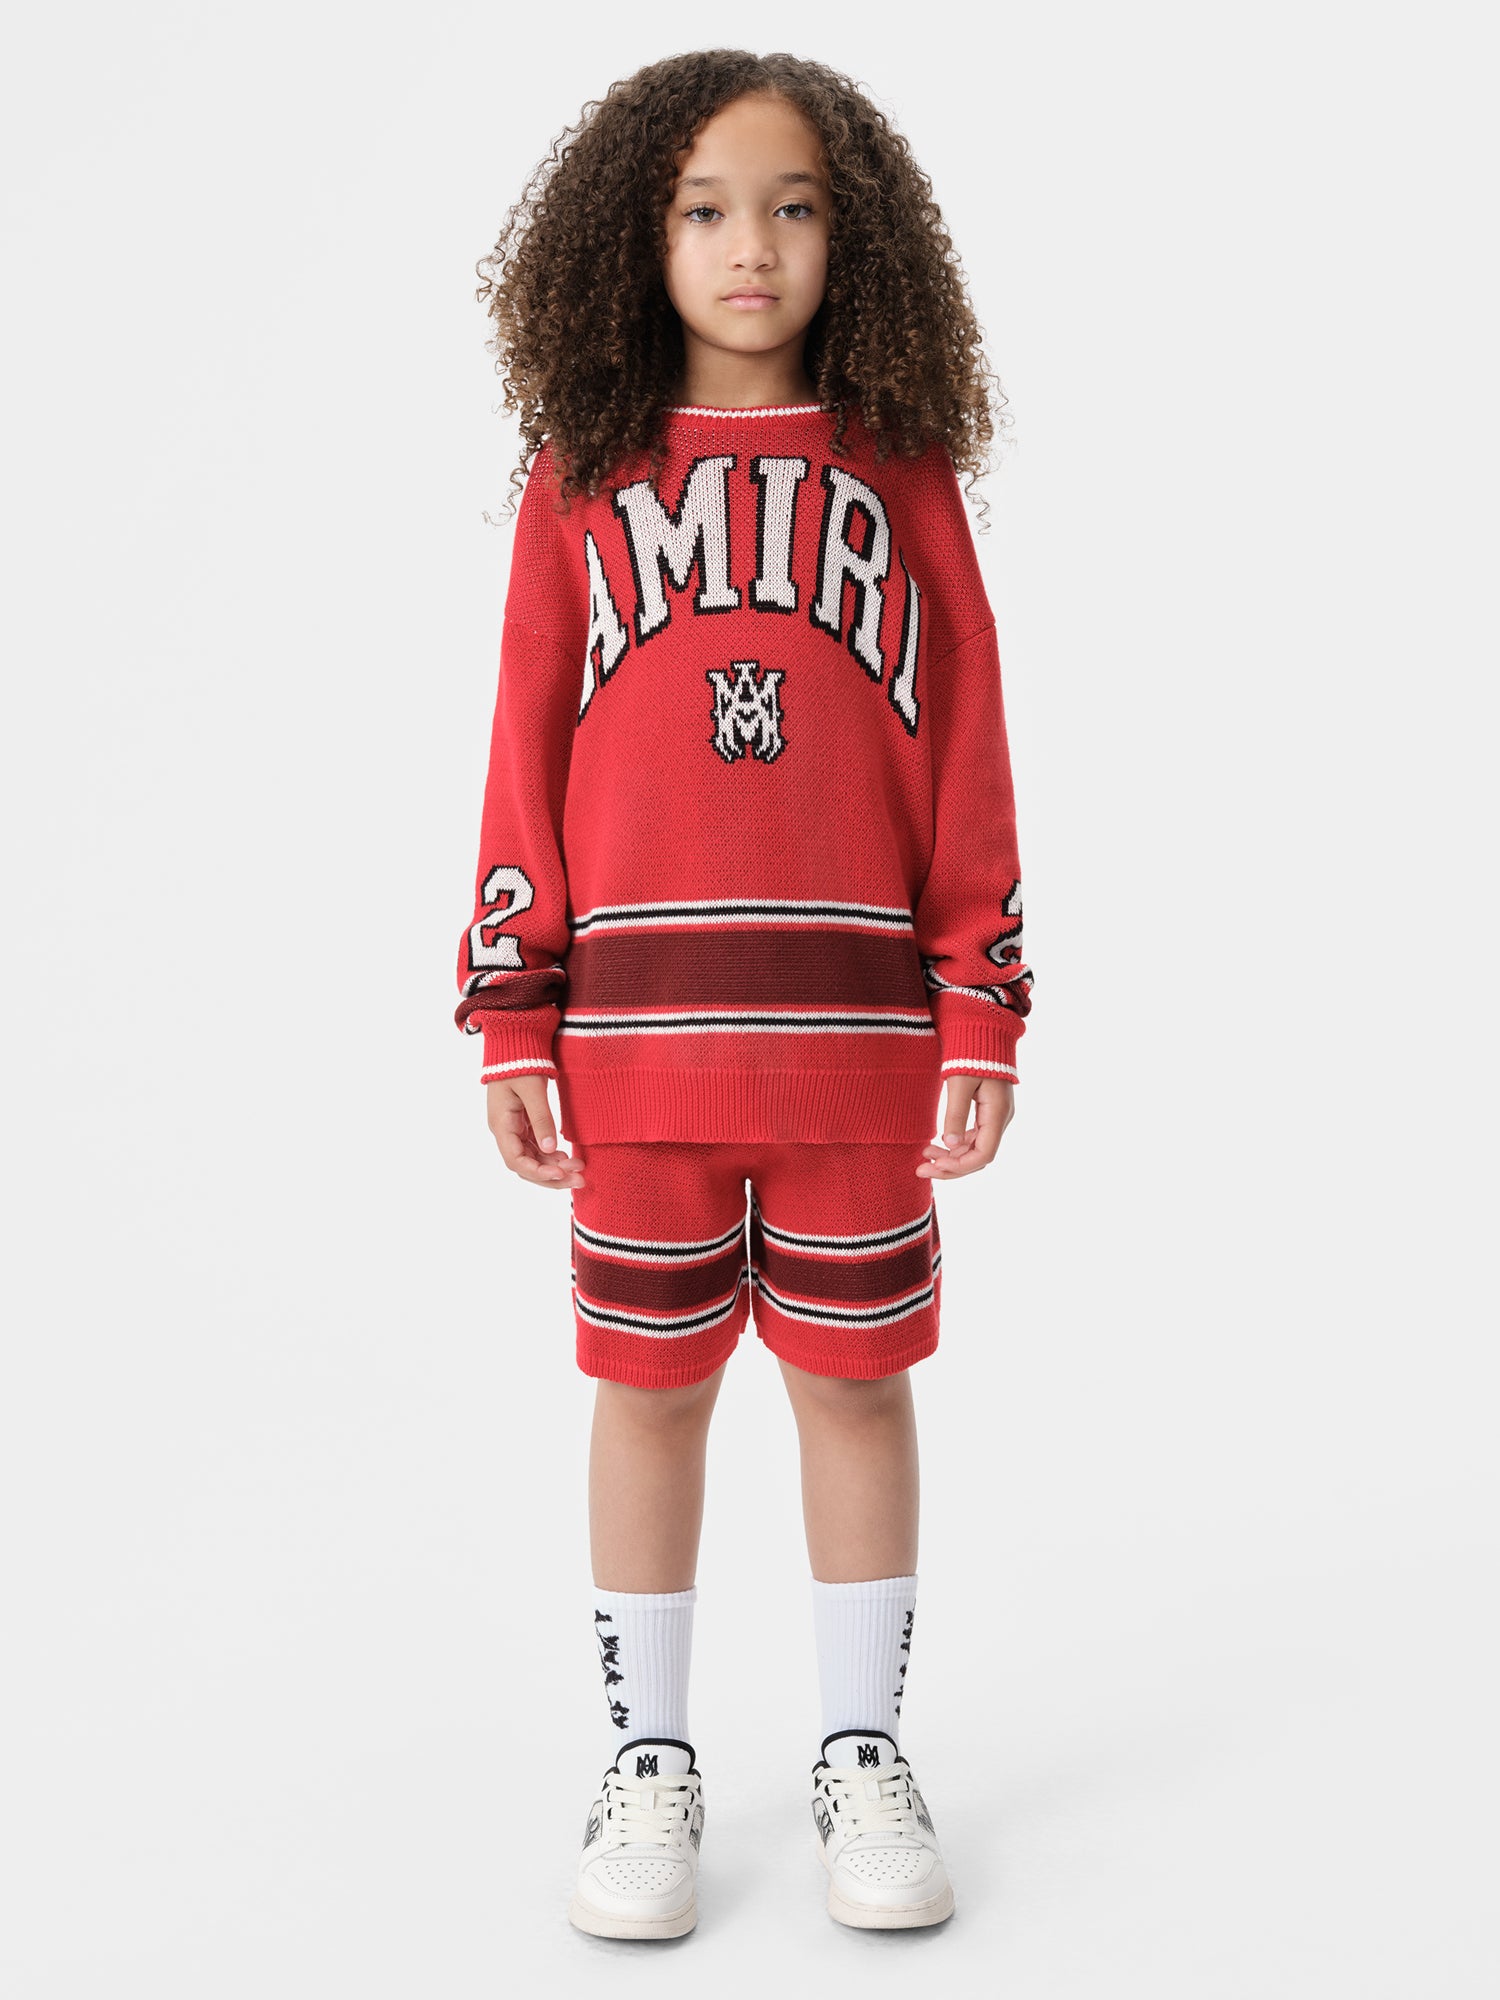 Product KIDS - AMIRI 22 STRIPE CREW - Red featured image